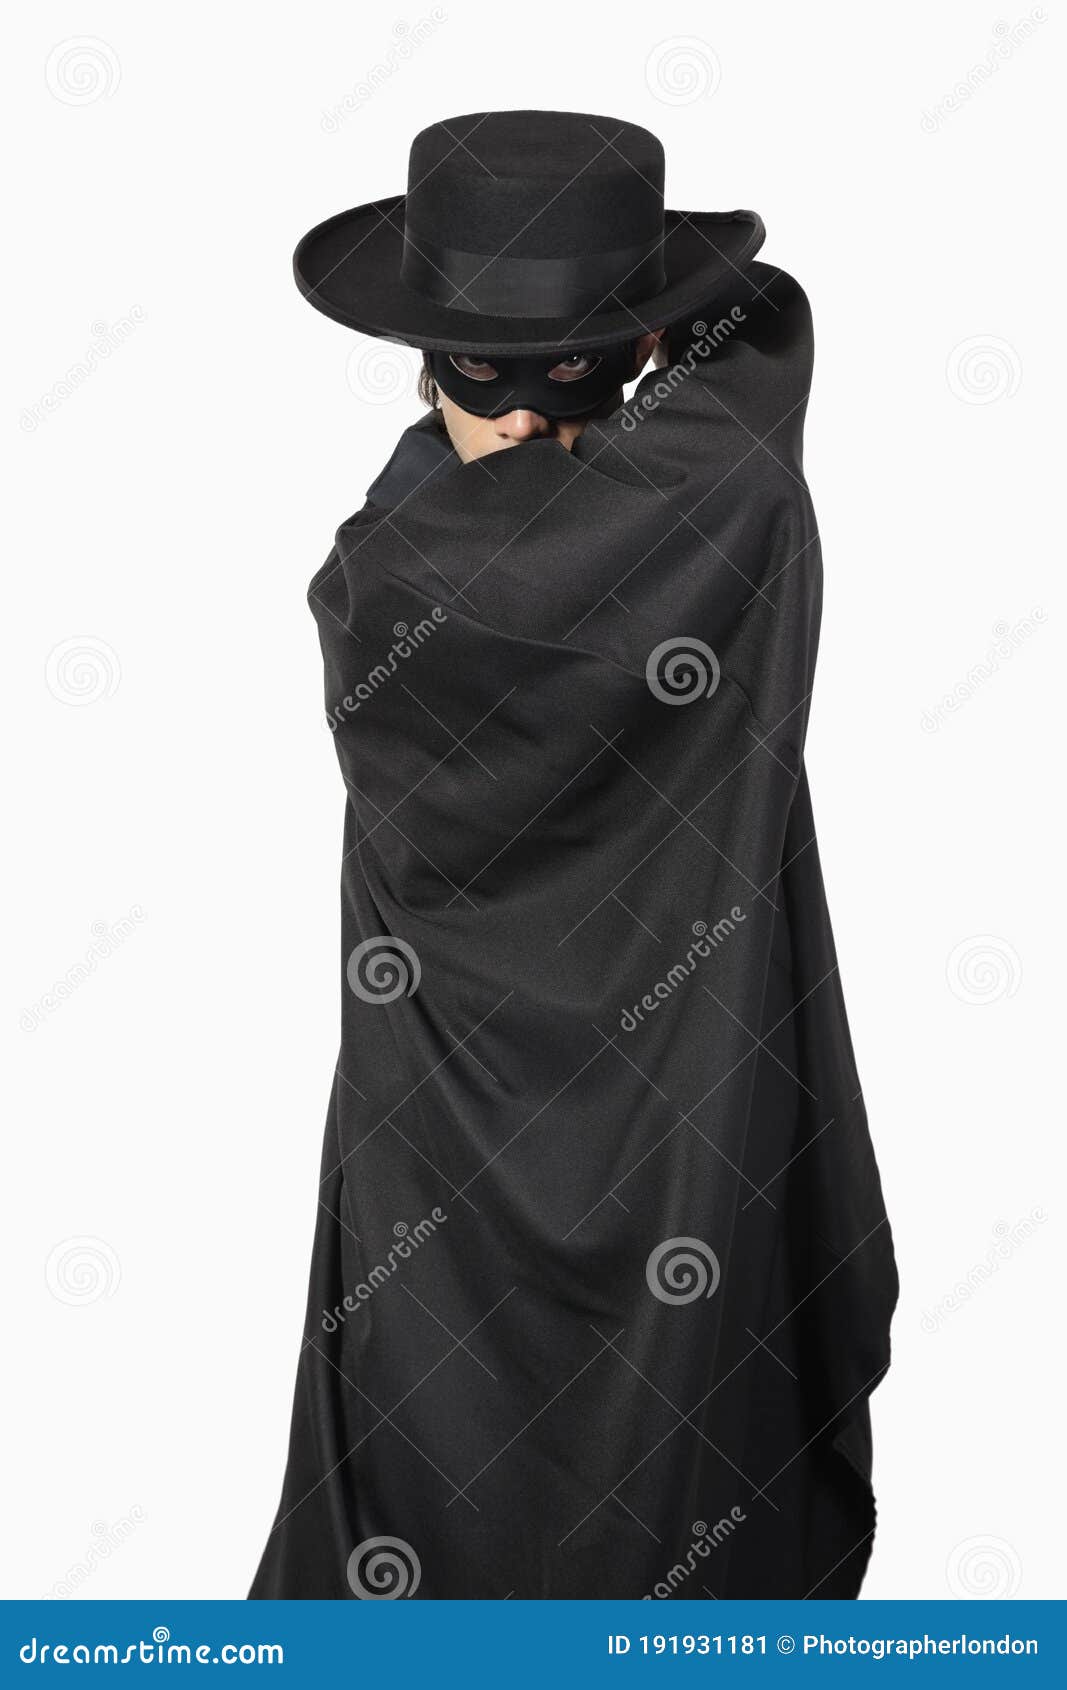 portrait of young man dressed as zorro against gray background